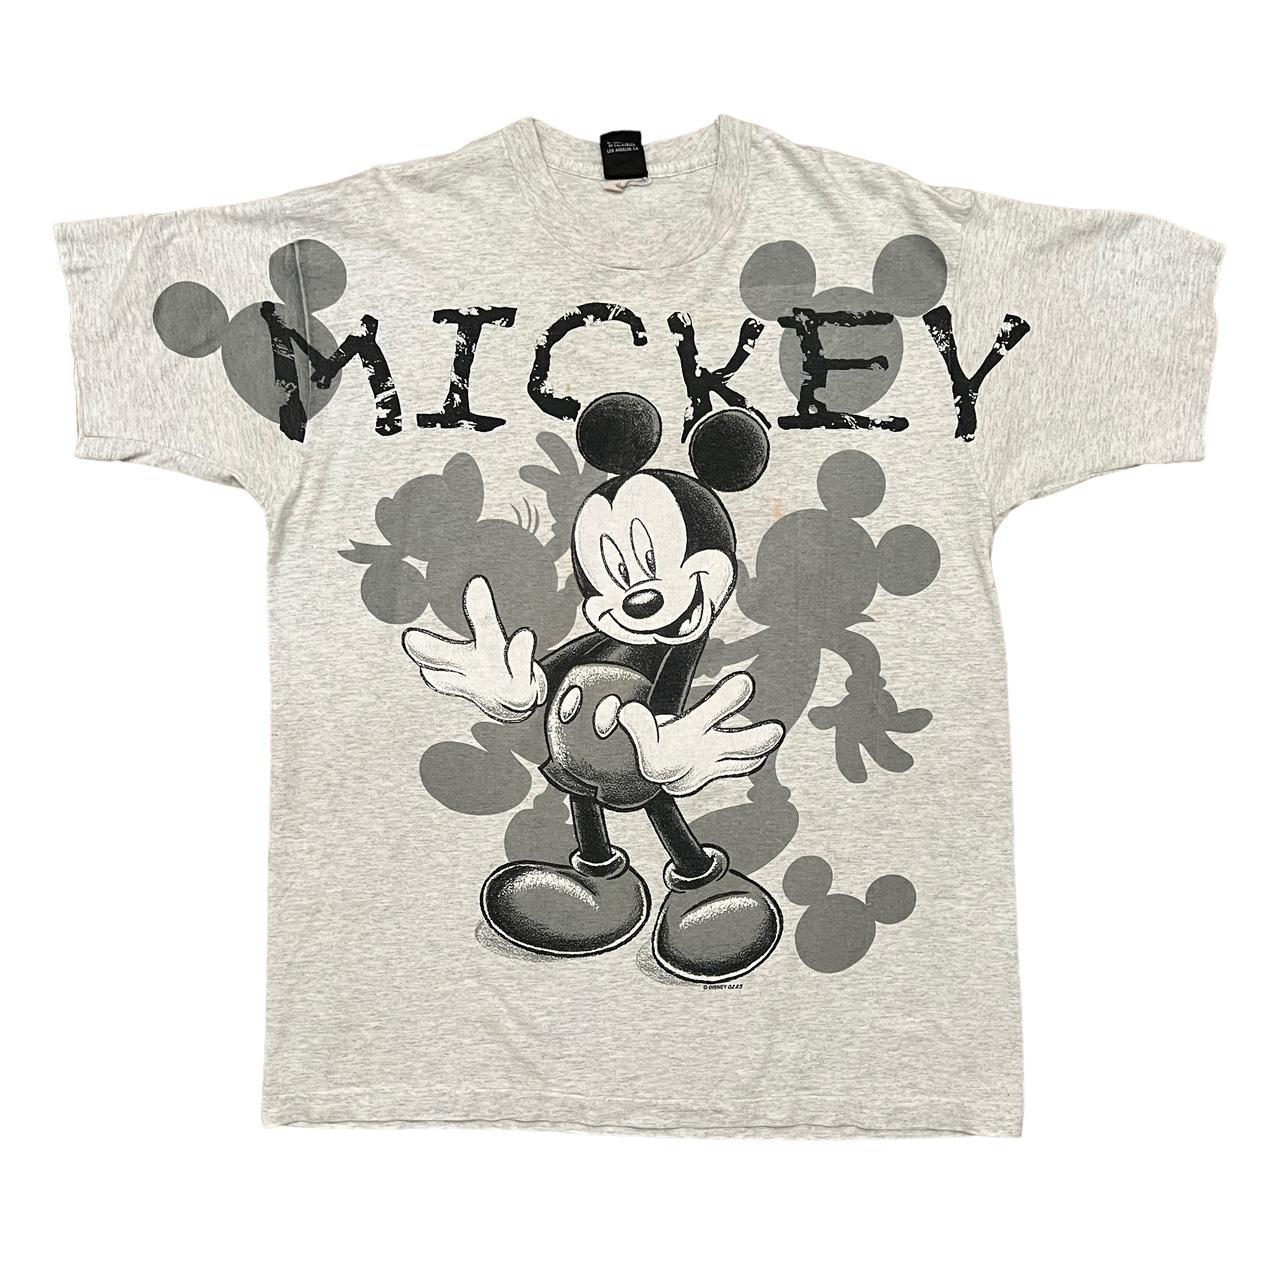 Vintage 90s Disney Mickey Mouse Shadow T Shirt, -...